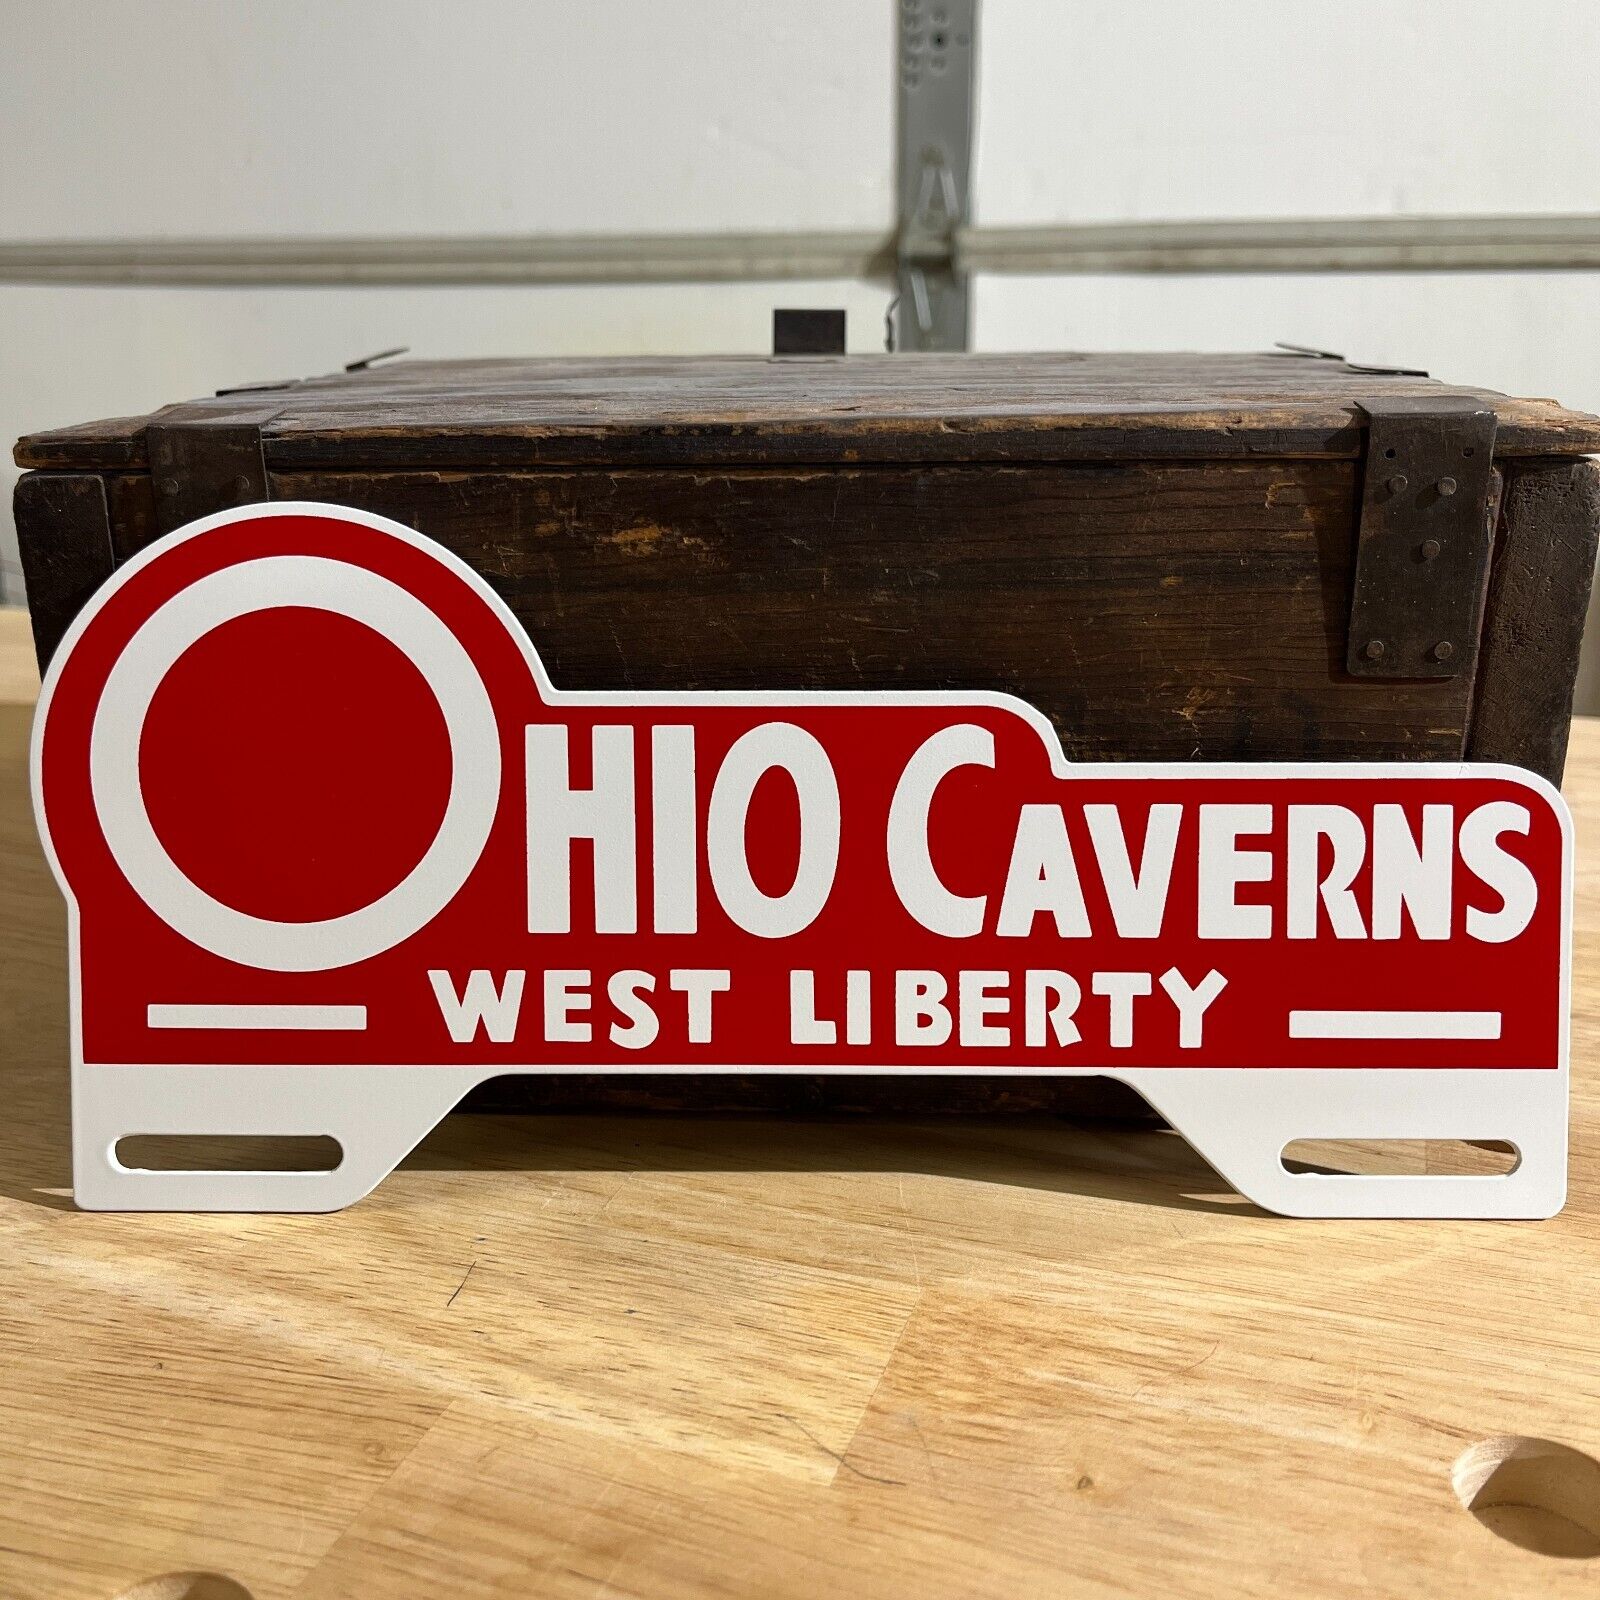 Ohio Caverns West Liberty Metal License Plate Tag Topper Sign